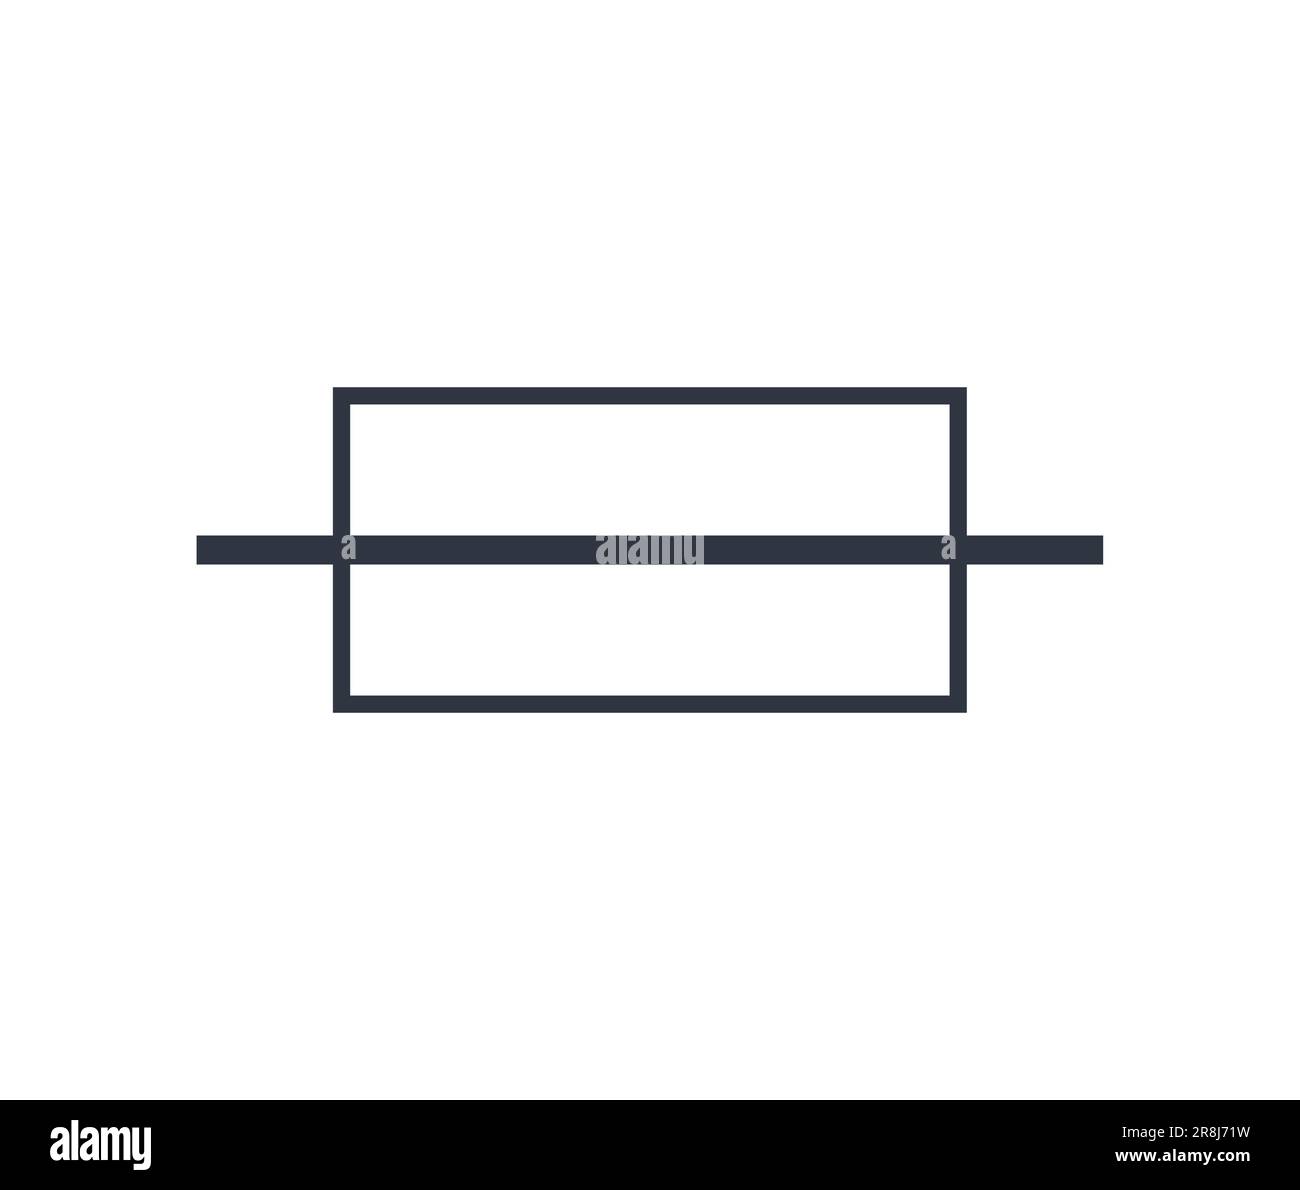 Isolated Fuse Symbol. Graphical Symbol for Use on Equipment. Stock Vector